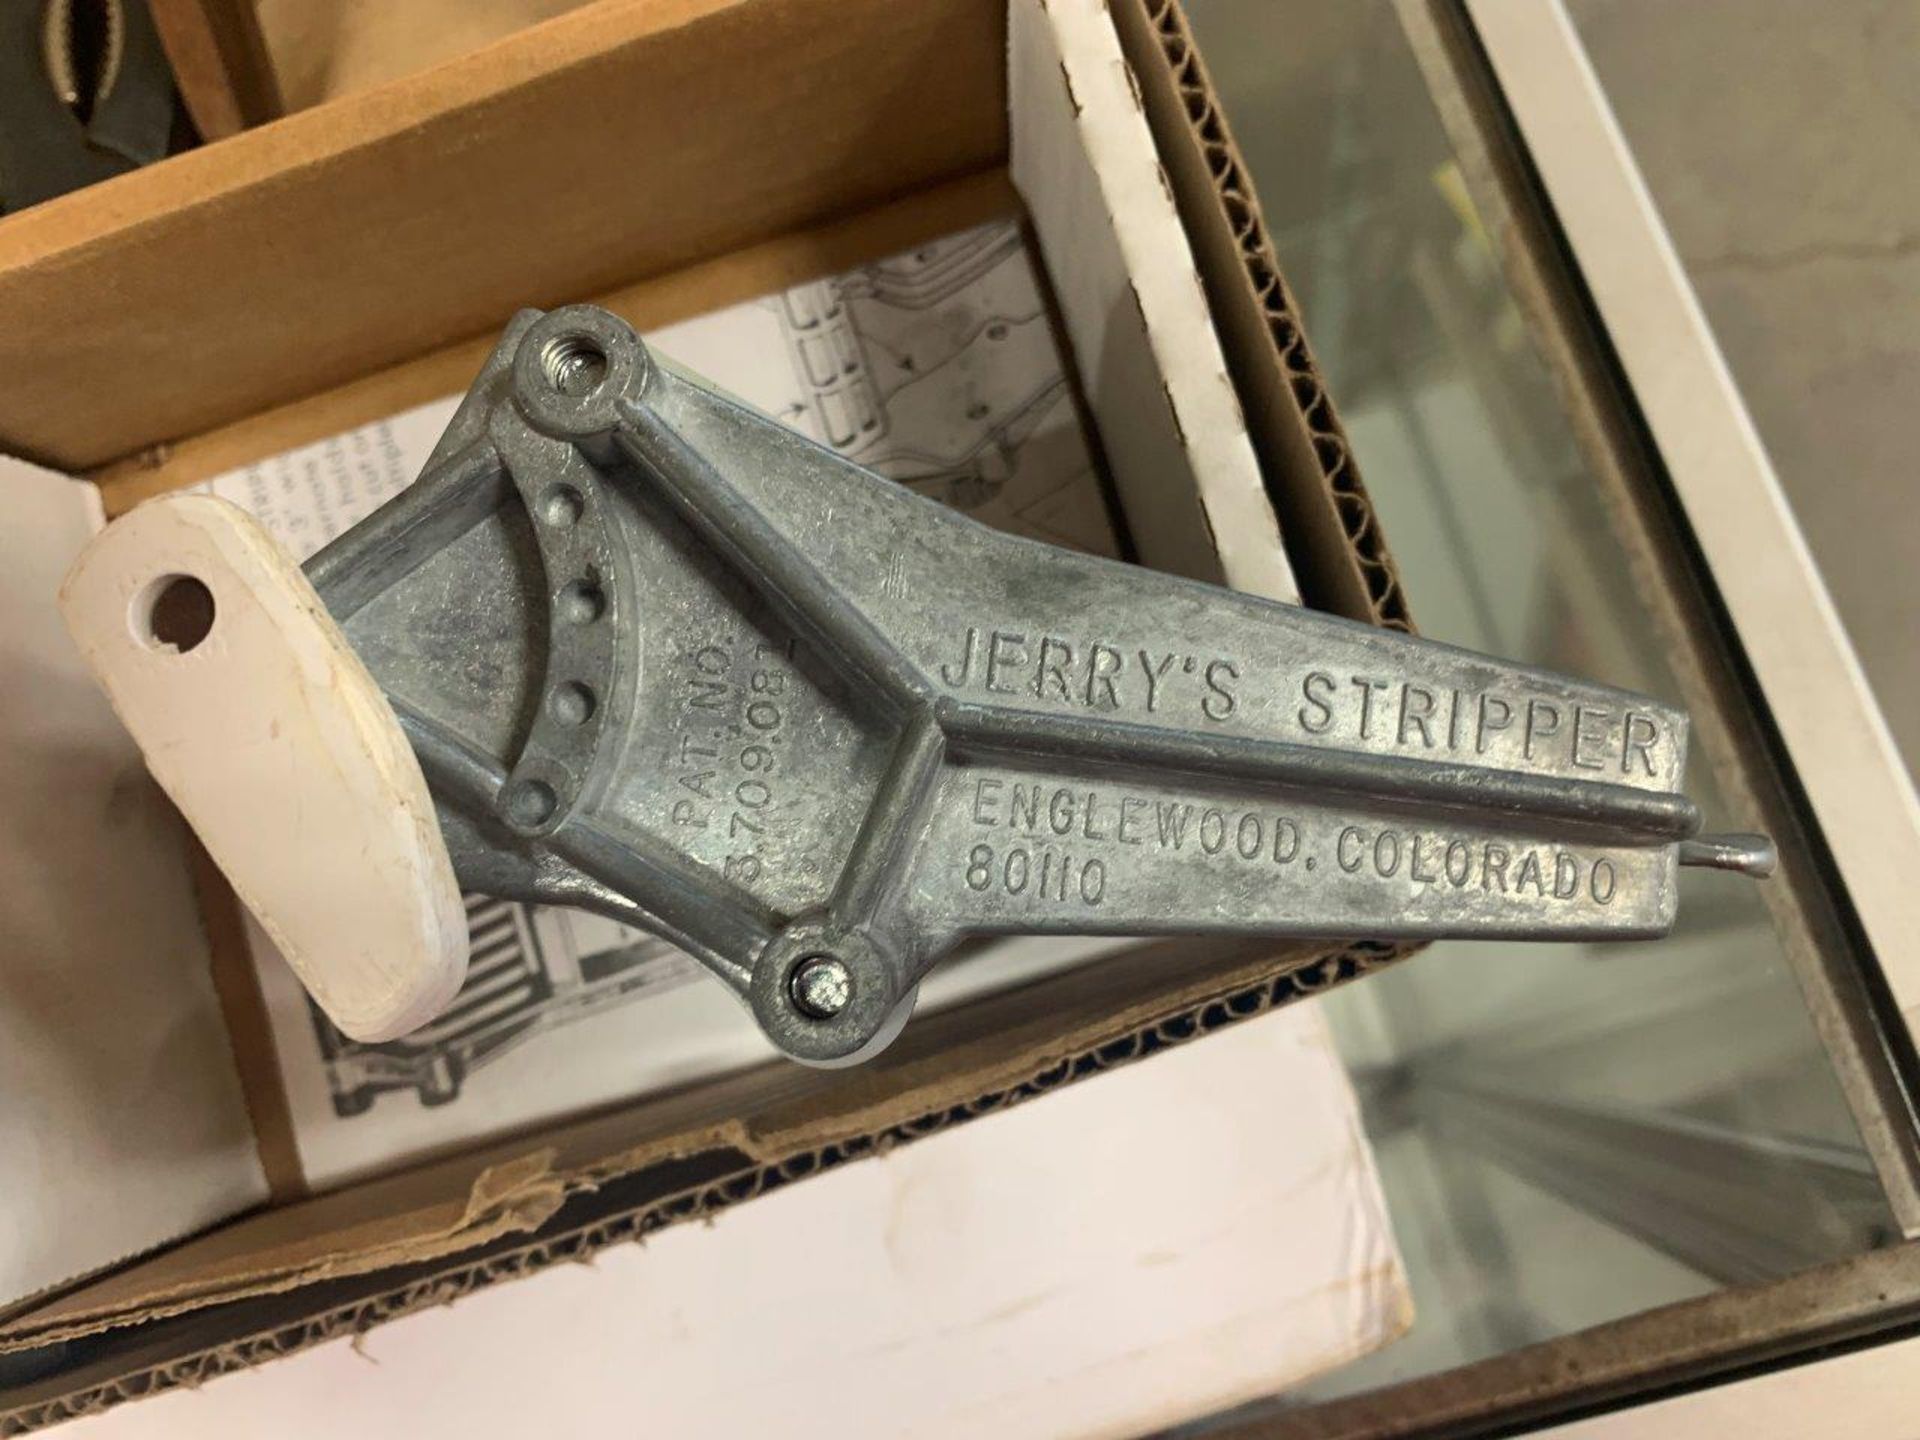 L/O ASSORTED LEATHER WORKING TOOLS, JERRYS LEATHER STRIPPER, PUNCHES, HOLE PUNCH, ETC. - Image 7 of 9